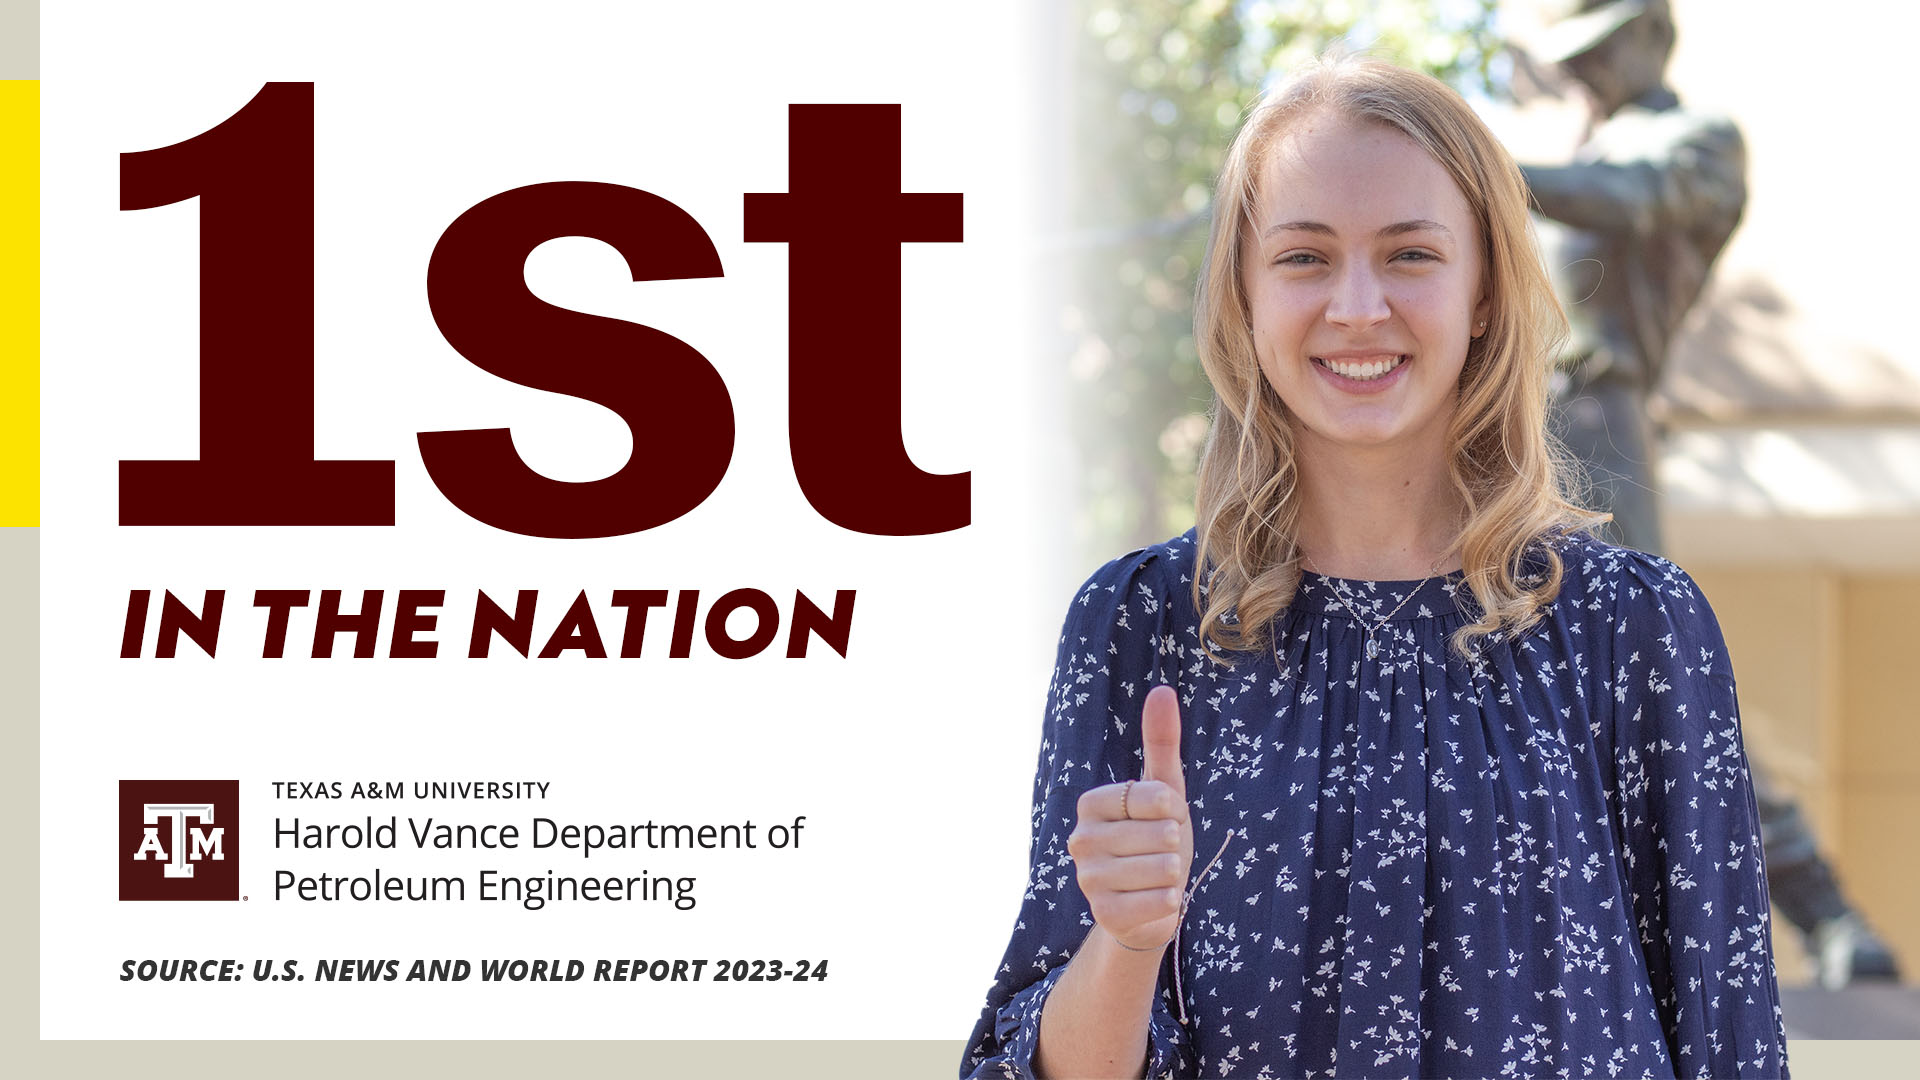 department of petroleum engineering logo with text '1st in the Nation per U.S. News and World Report, 2024' superimposed on image of young female undergraduate student.